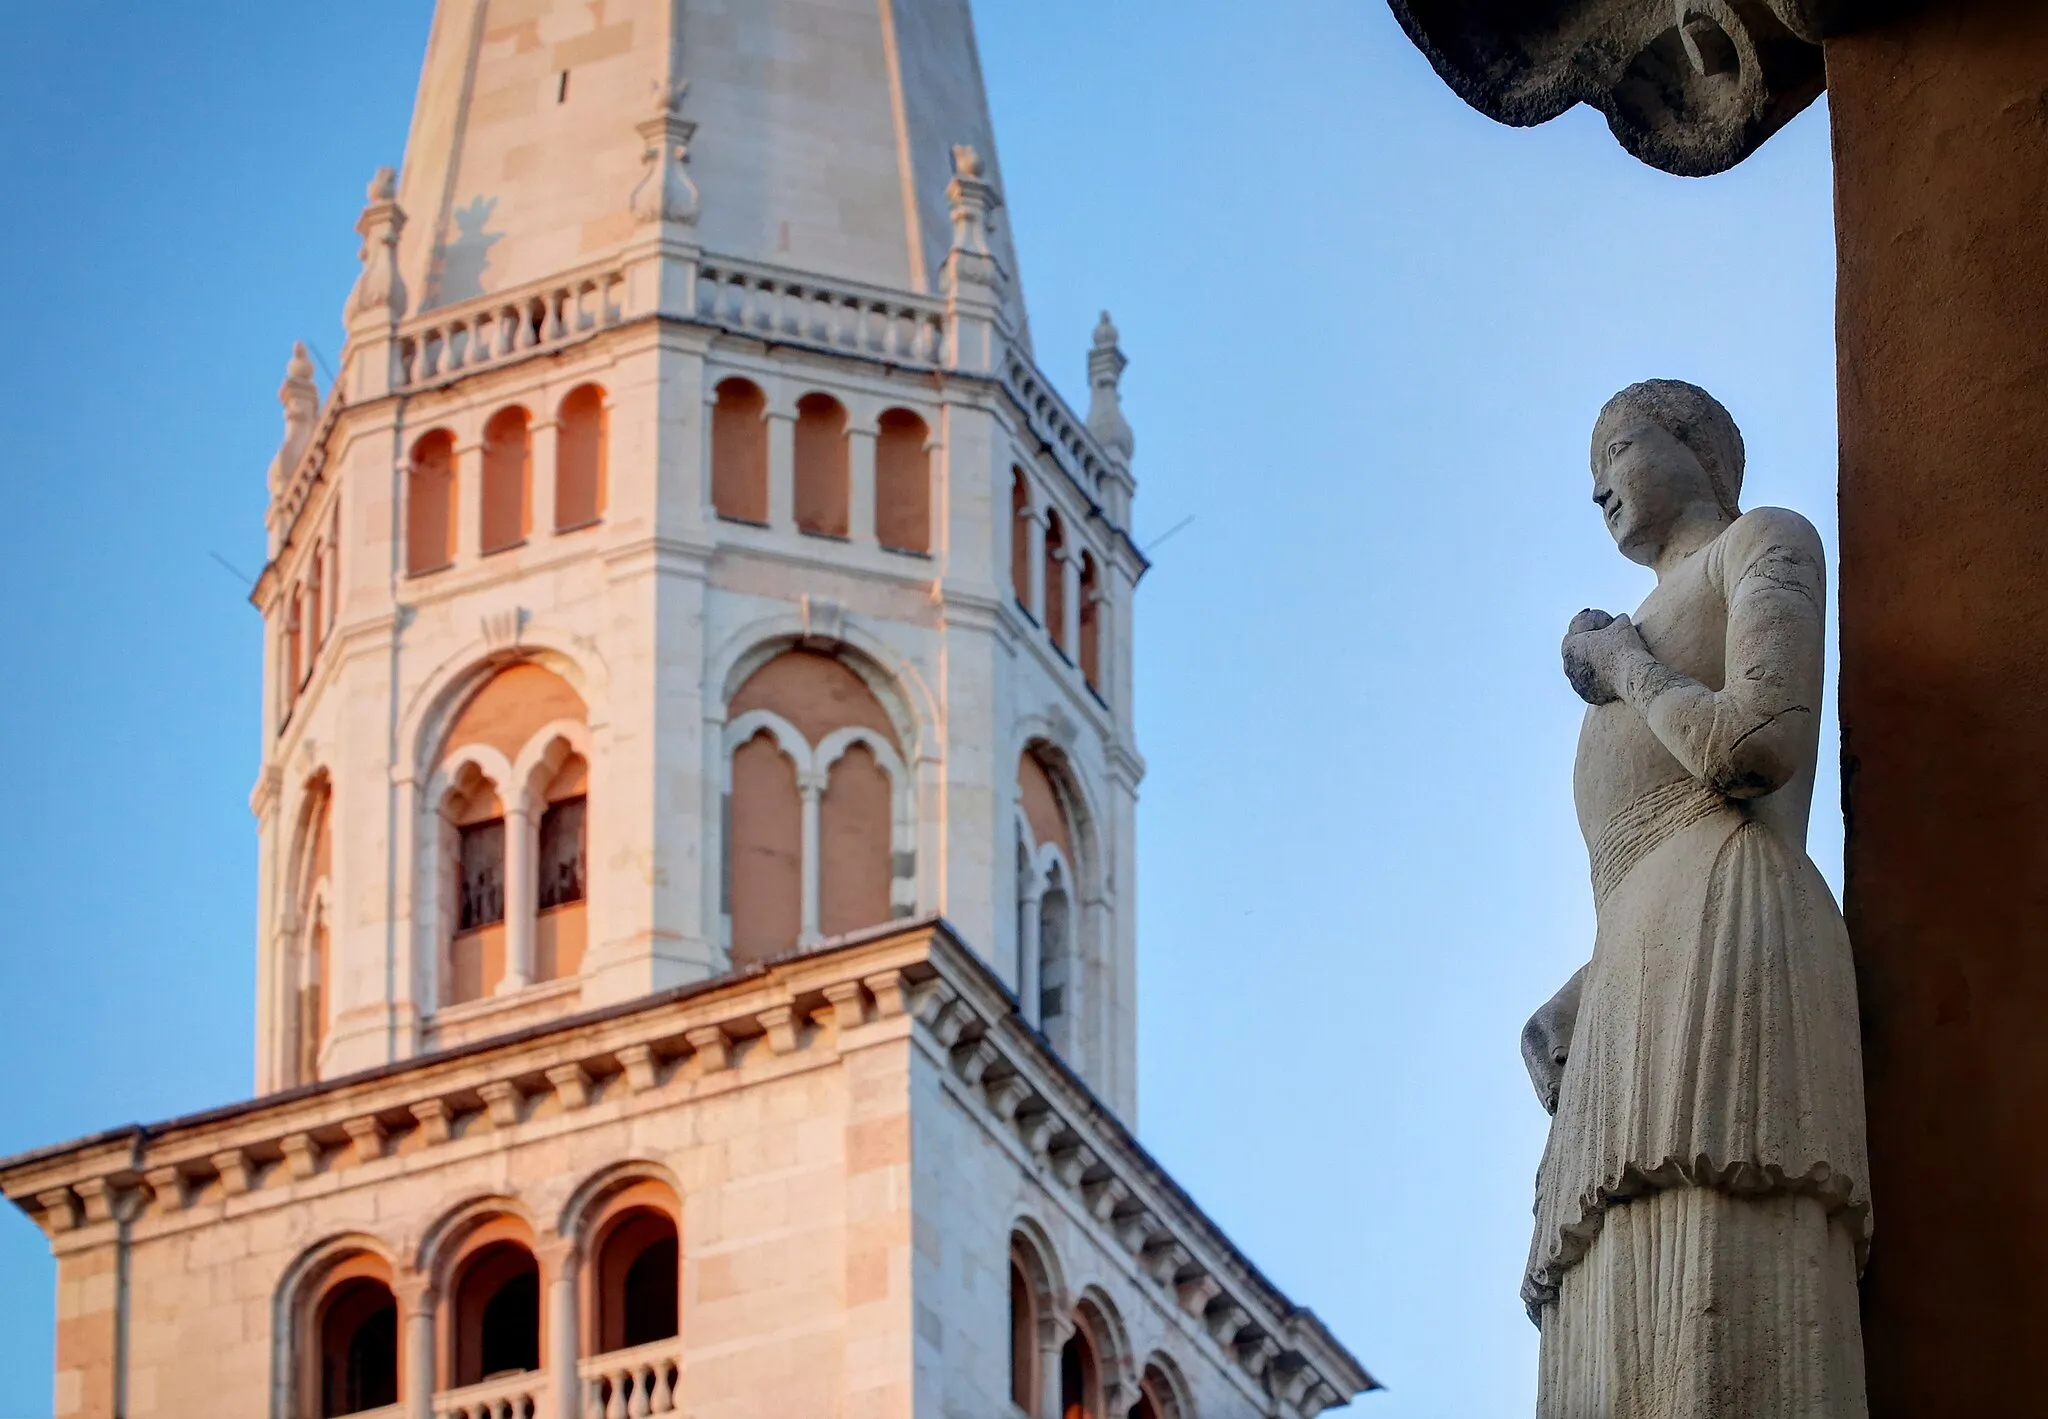 Photo showing: View of Piazza Grande with detail of the statue of La Bonissima and the Ghirlandina tower in the background